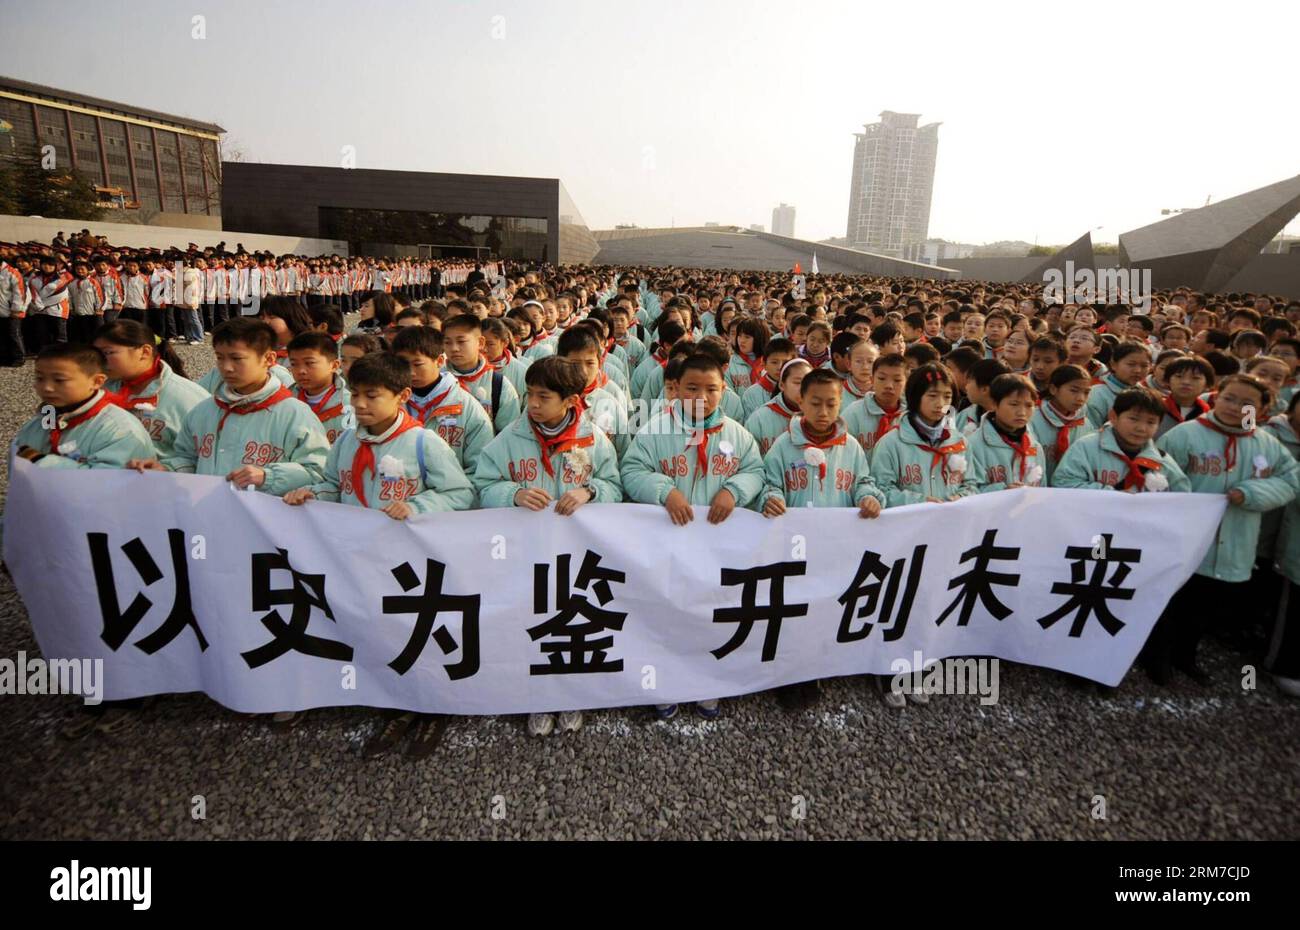 (140225) -- BEIJING, Feb. 25, 2014 (Xinhua) -- Delegates of primary school students hold a banner reading drawing lessons from the history and creating the future during a rally to mourn the victims of the Nanjing Massacre, at the square in front of the memorial hall of the Chinese victims massacred by Japanese soldiers in Nanjing, capital of east China s Jiangsu Province, Dec. 13, 2008. Chinese lawmakers are mulling making December 13 a national memorial day to commemorate those killed by Japanese aggressors during the Nanjing Massacre. The draft decision will be discussed at the bi-monthly s Stock Photo